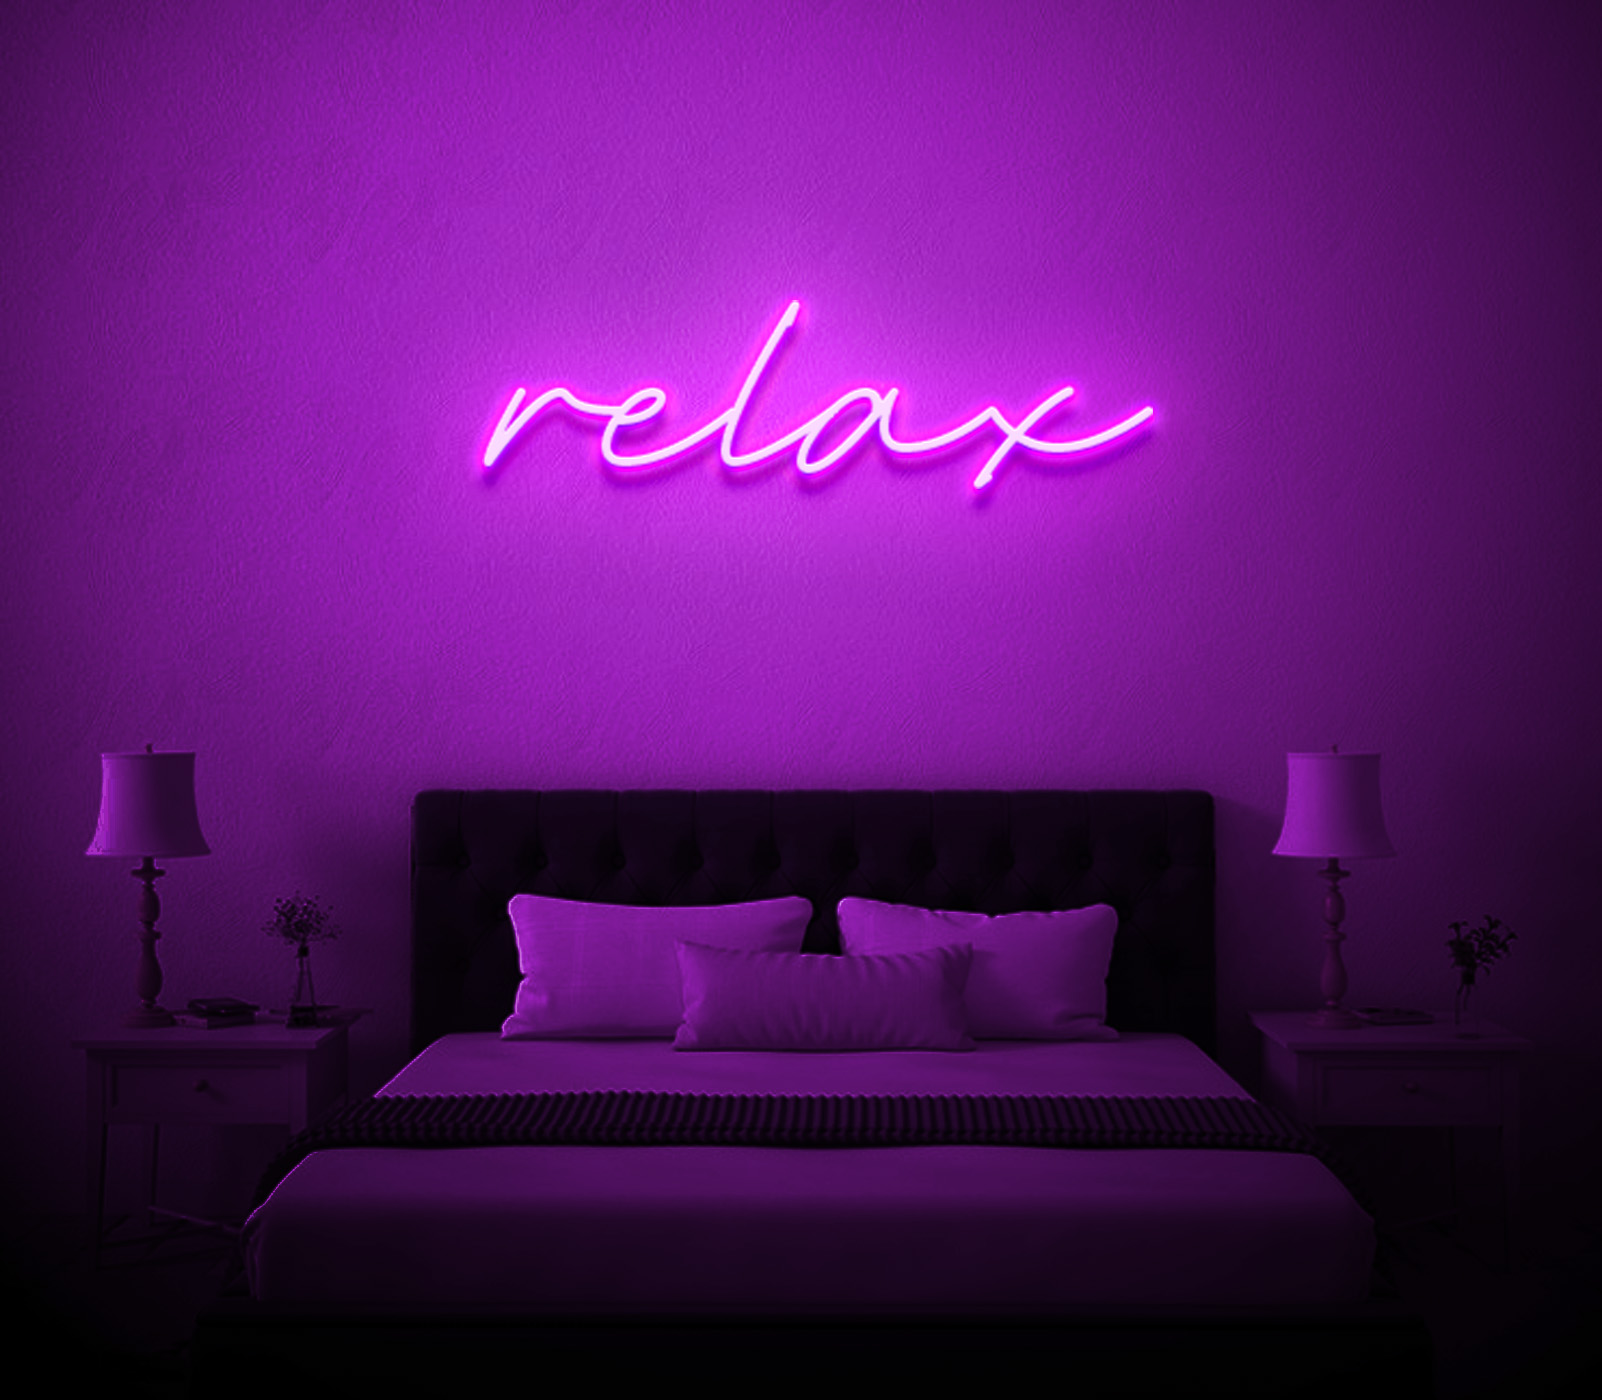 relax neon sign